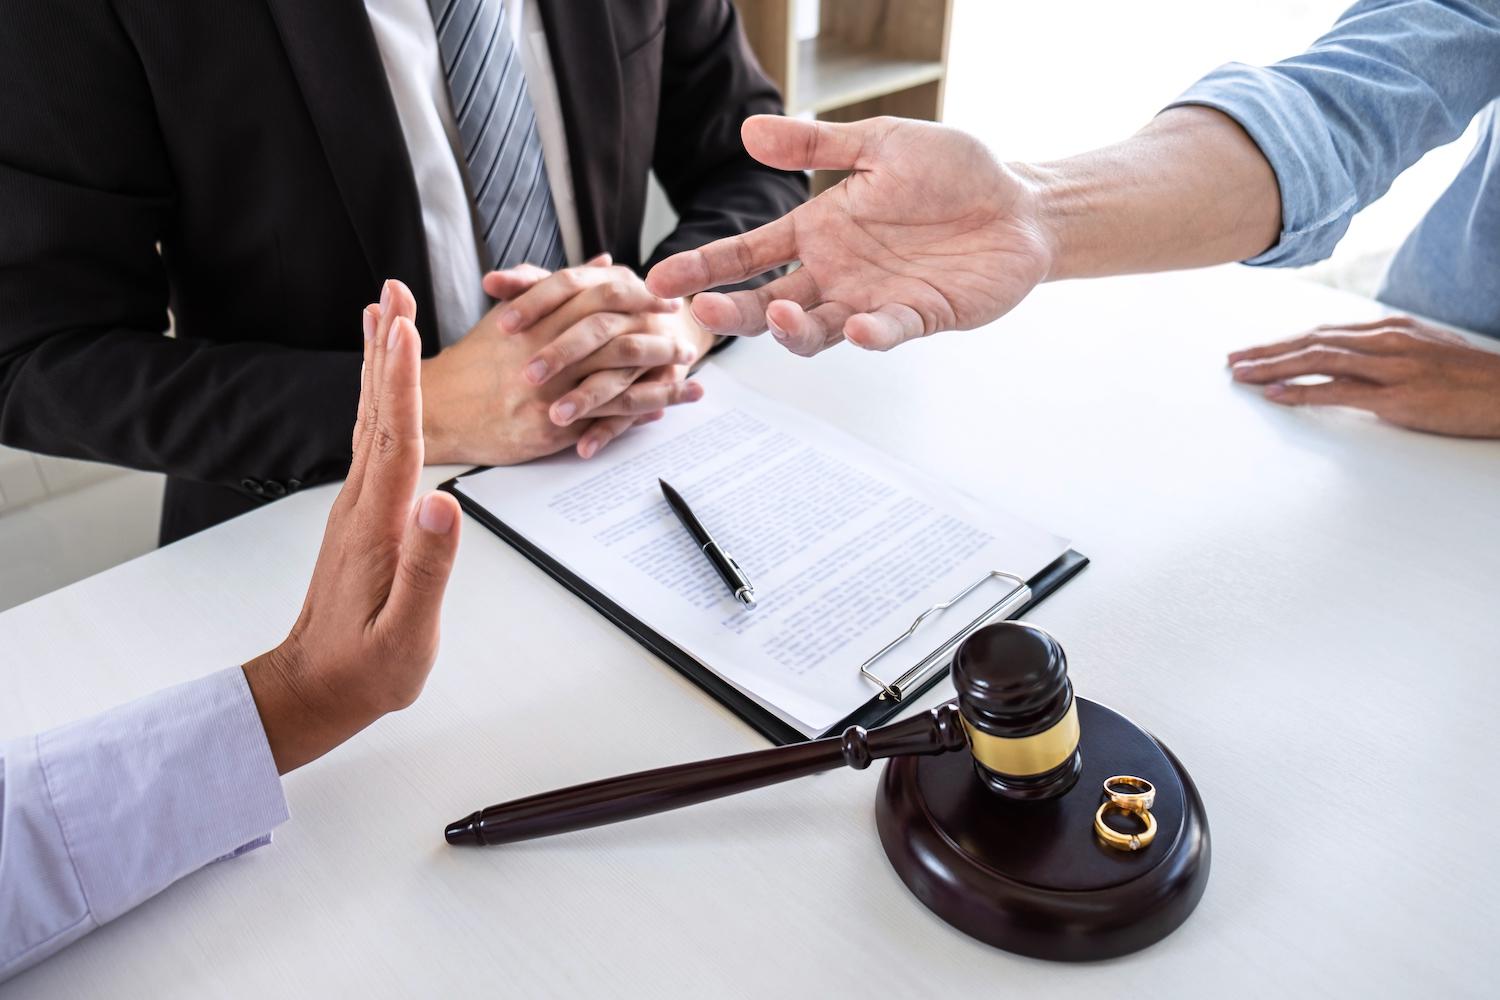 Why You Need an Attorney to Help with Your Divorce